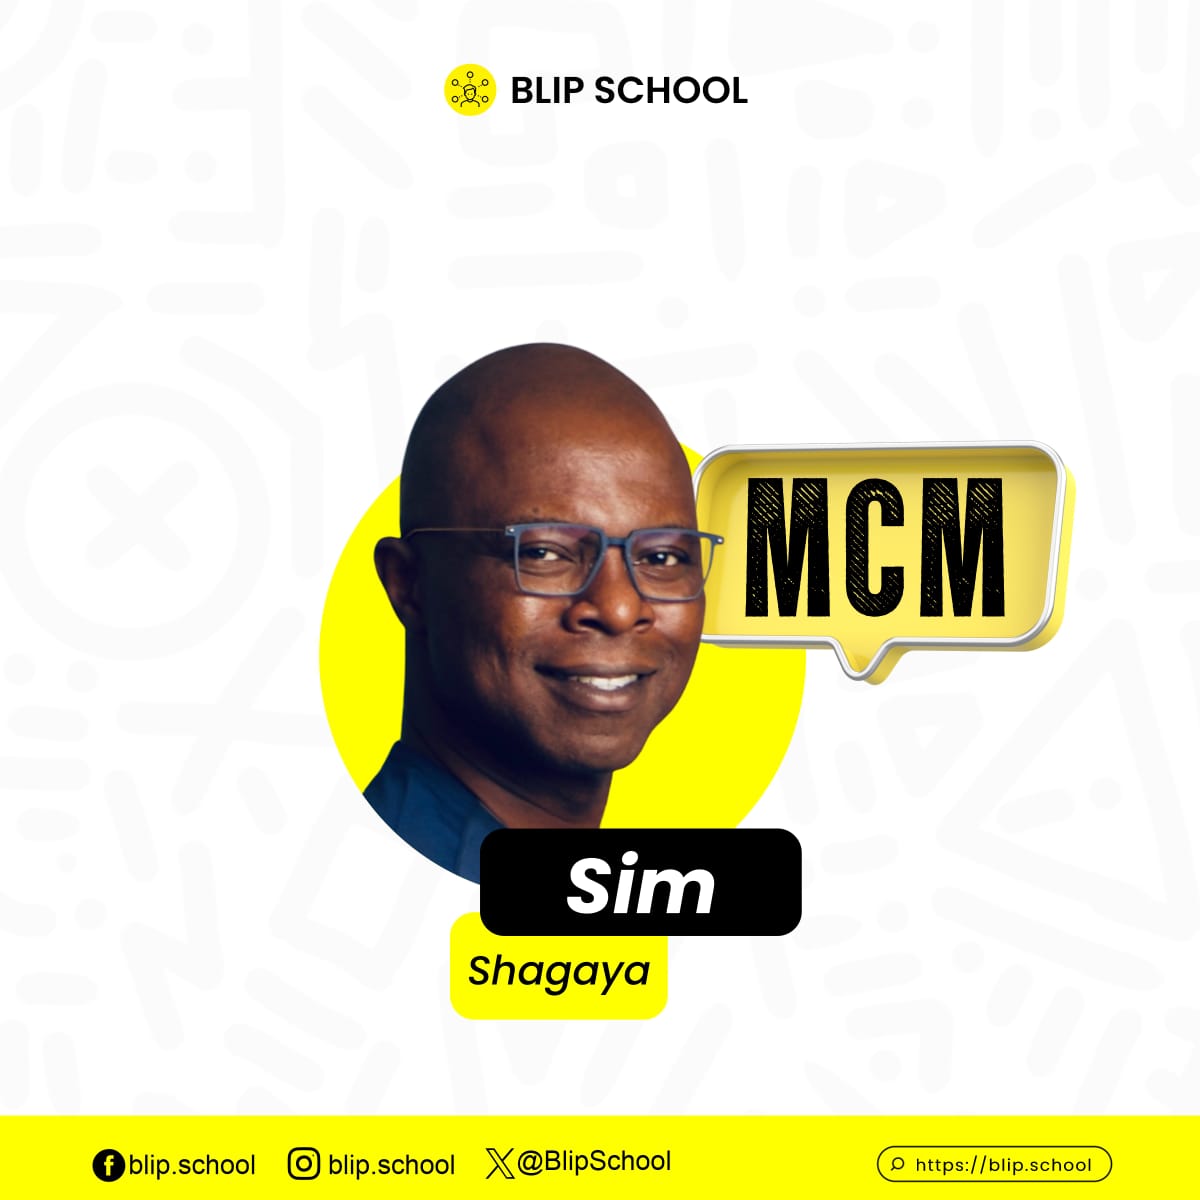 🥰 Prepare to be amazed by our phenomenal #MCM! 

😍Discover the inspiring tale of a true tech trailblazer in the comments below! #TechIcons 
#InspirationalStories
#bbldrizzybeatgiveaway